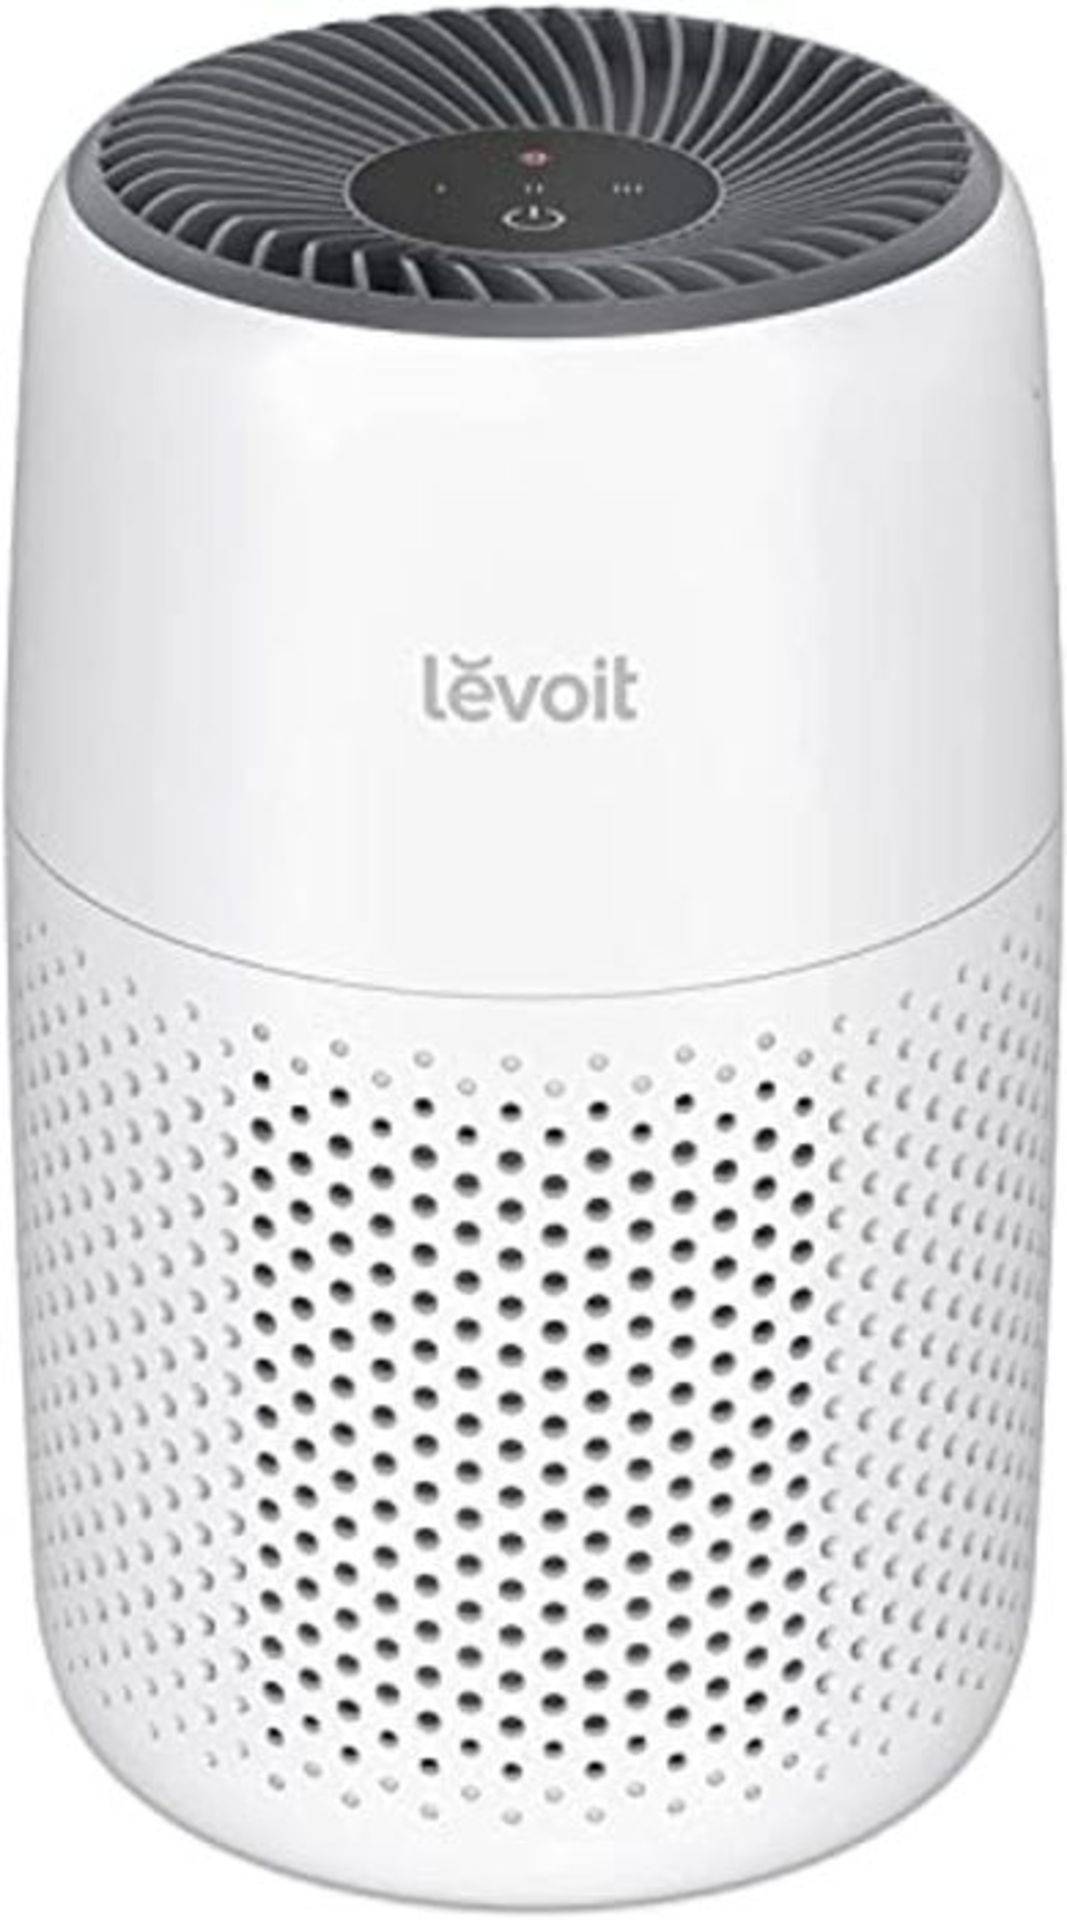 LEVOIT Air Purifier for Home Bedroom, Ultra Quiet HEPA Air Filter Cleaner with Fragran - Image 4 of 6